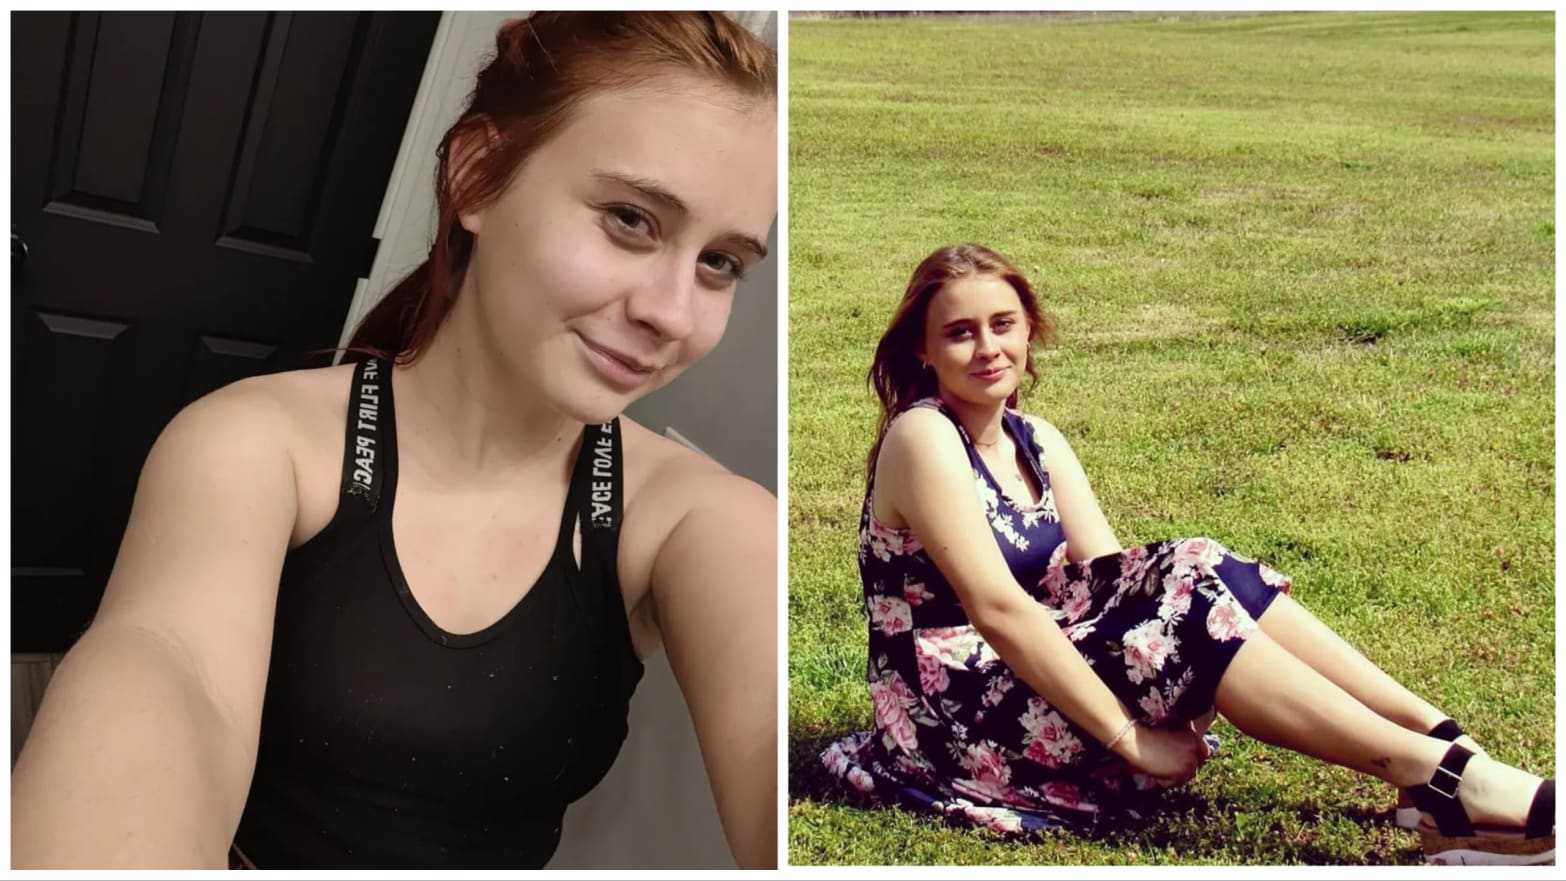 Search For Missing Okmulgee Teens Ivy Webster Brittany Brewer Ends In Discovery Of 7 Bodies 